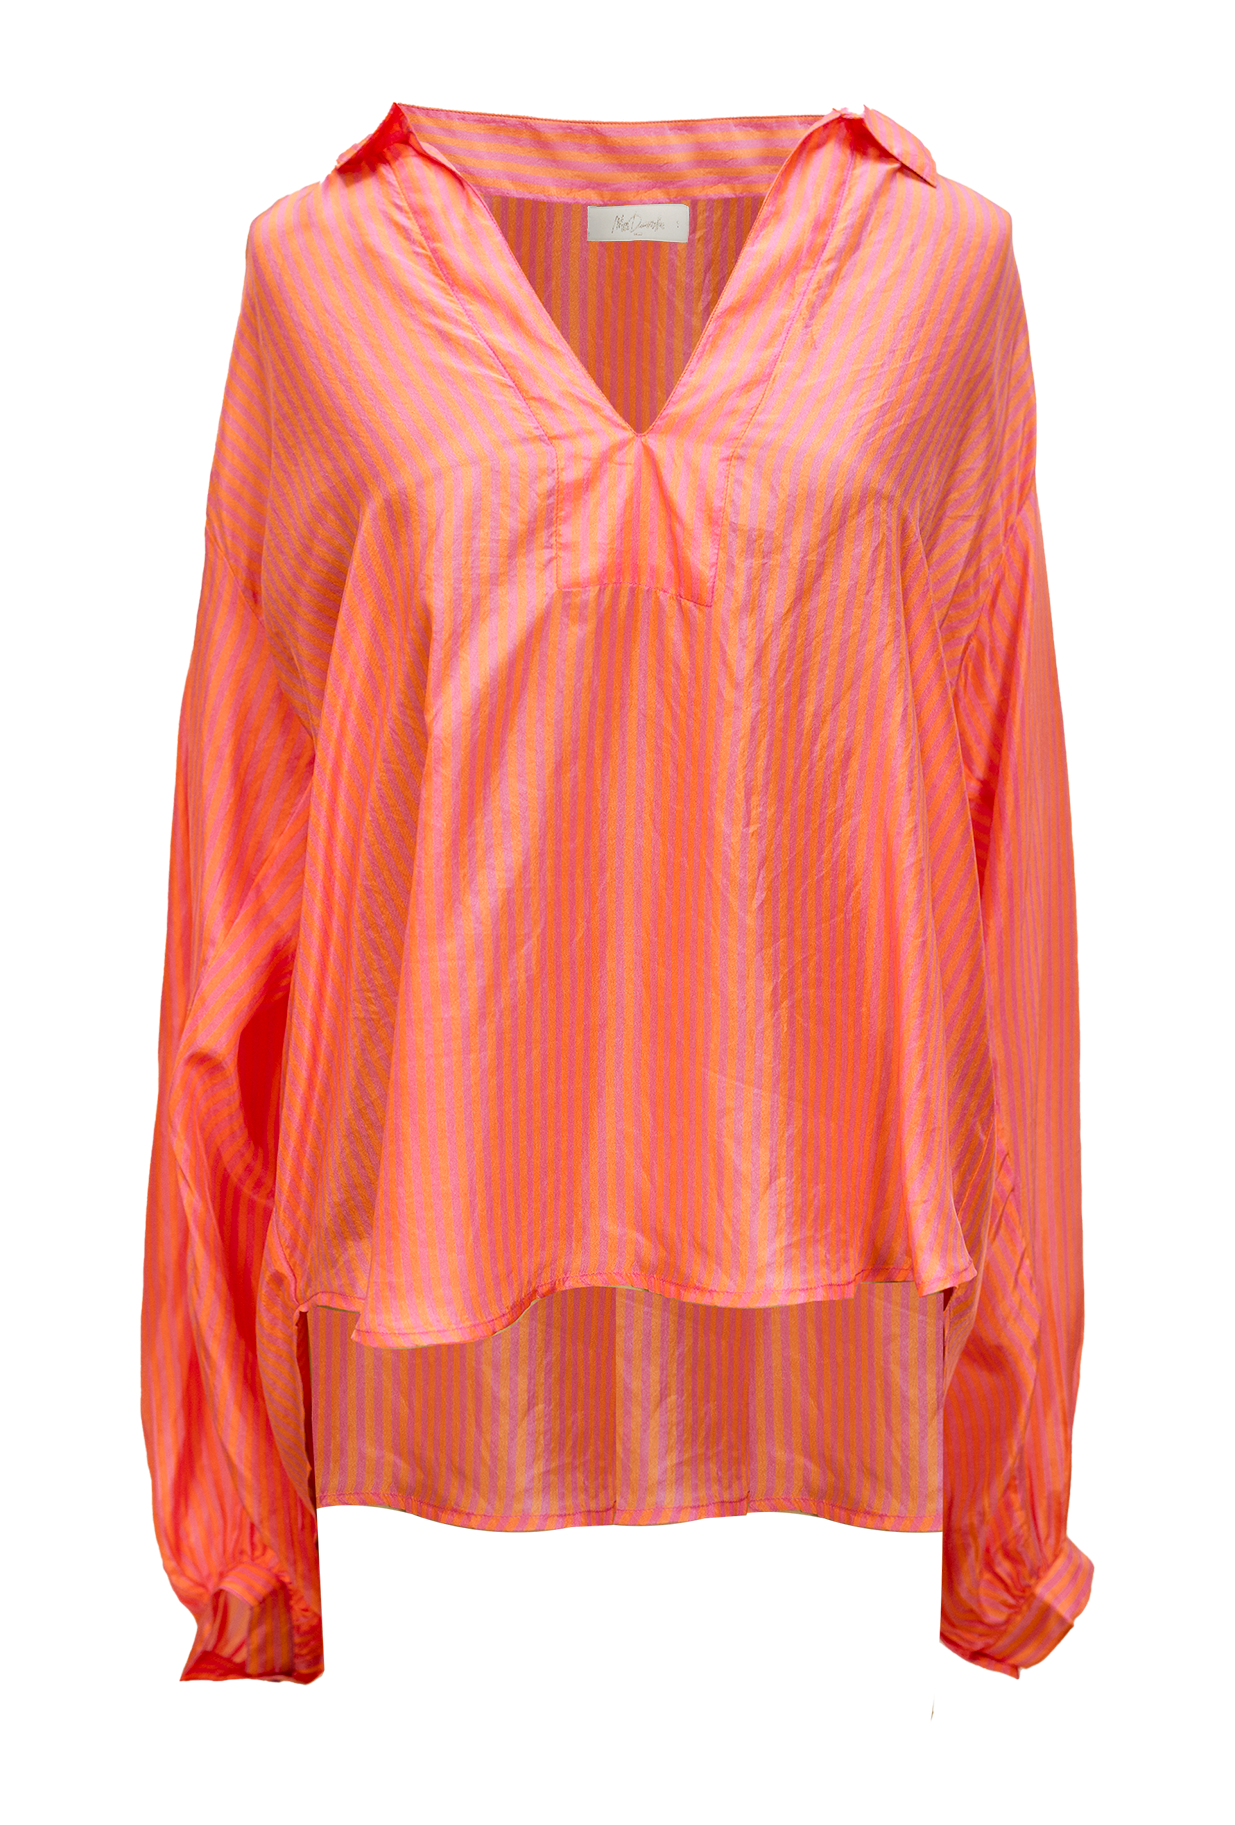 Pink and orange striped silk top with notch neck and collar with long sleeves gathered at shoulder and cuff